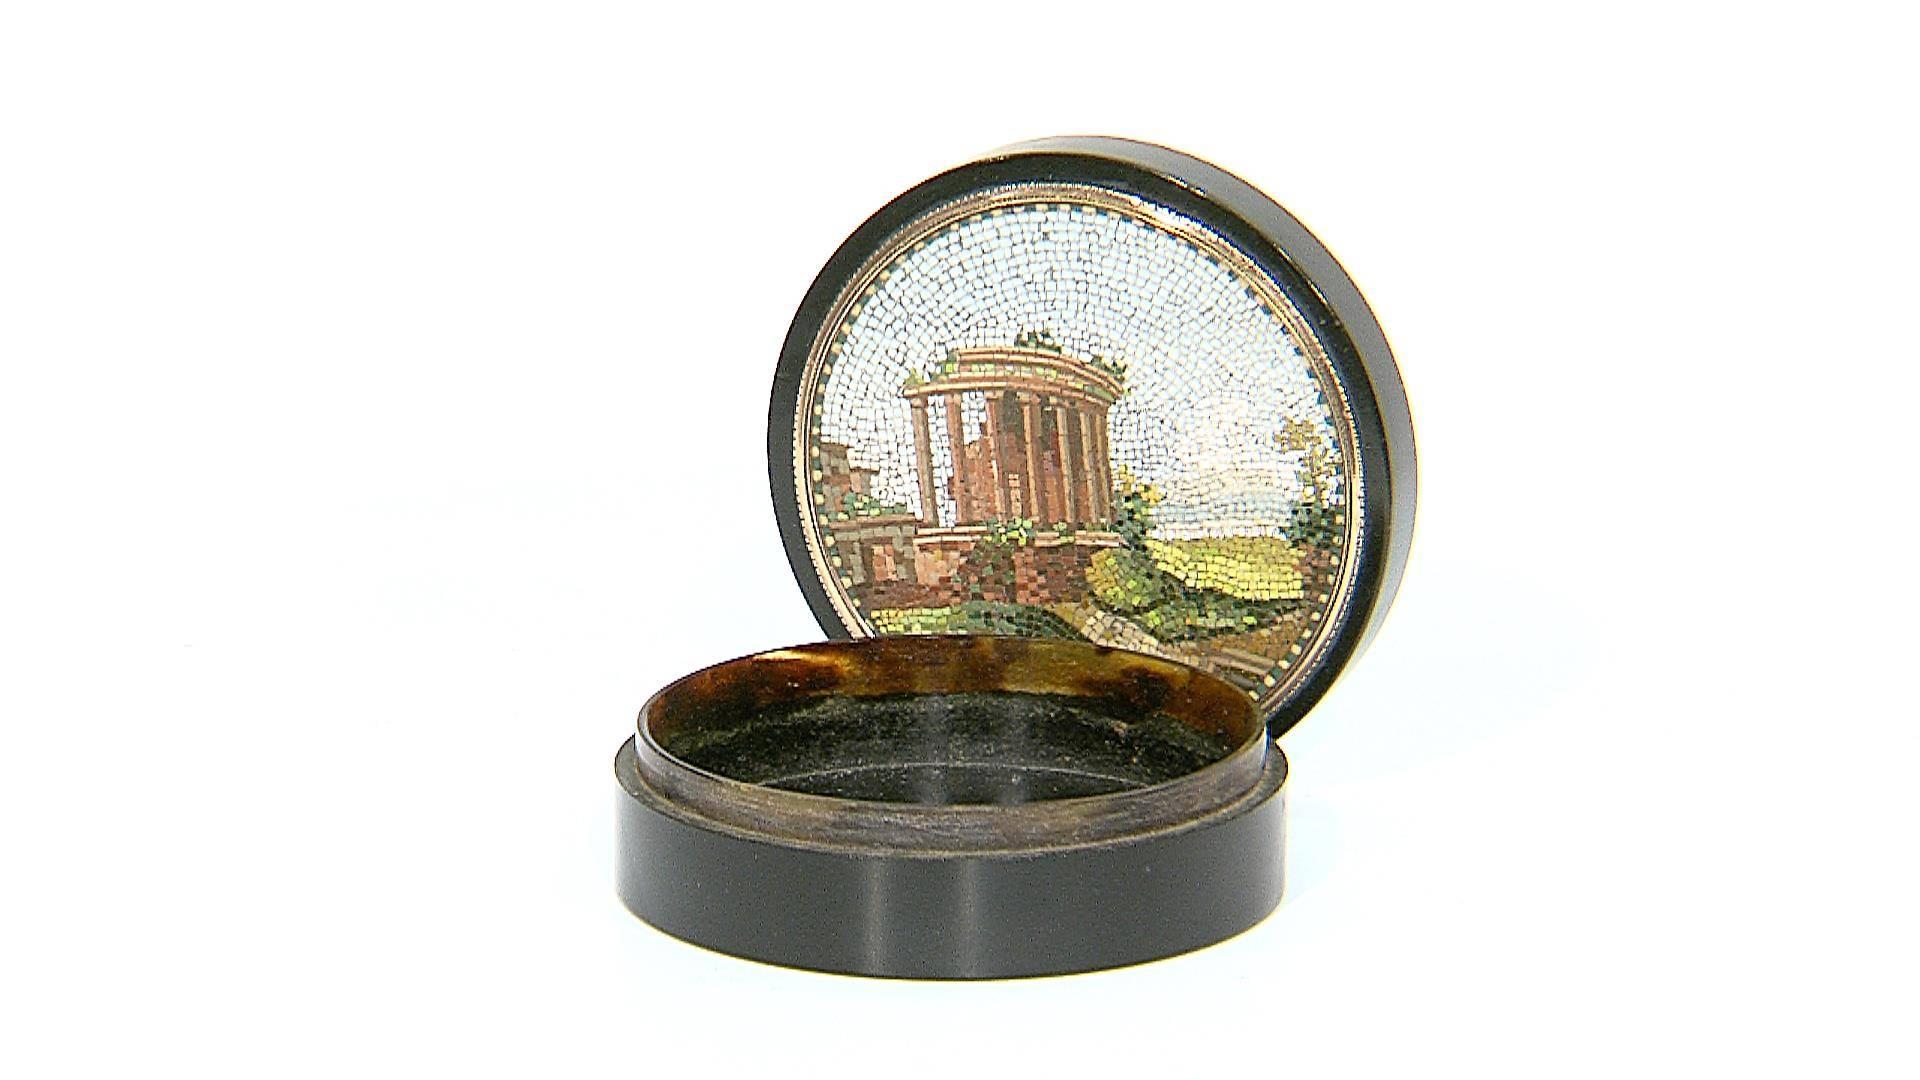 Tortoise shell pill box with gold ferrule. The micromosaic depicts Temple of Vesta in Rome. From the Vatican school “Reverenda Fabrica Sancti Petri,” late 18th-early 19th century.